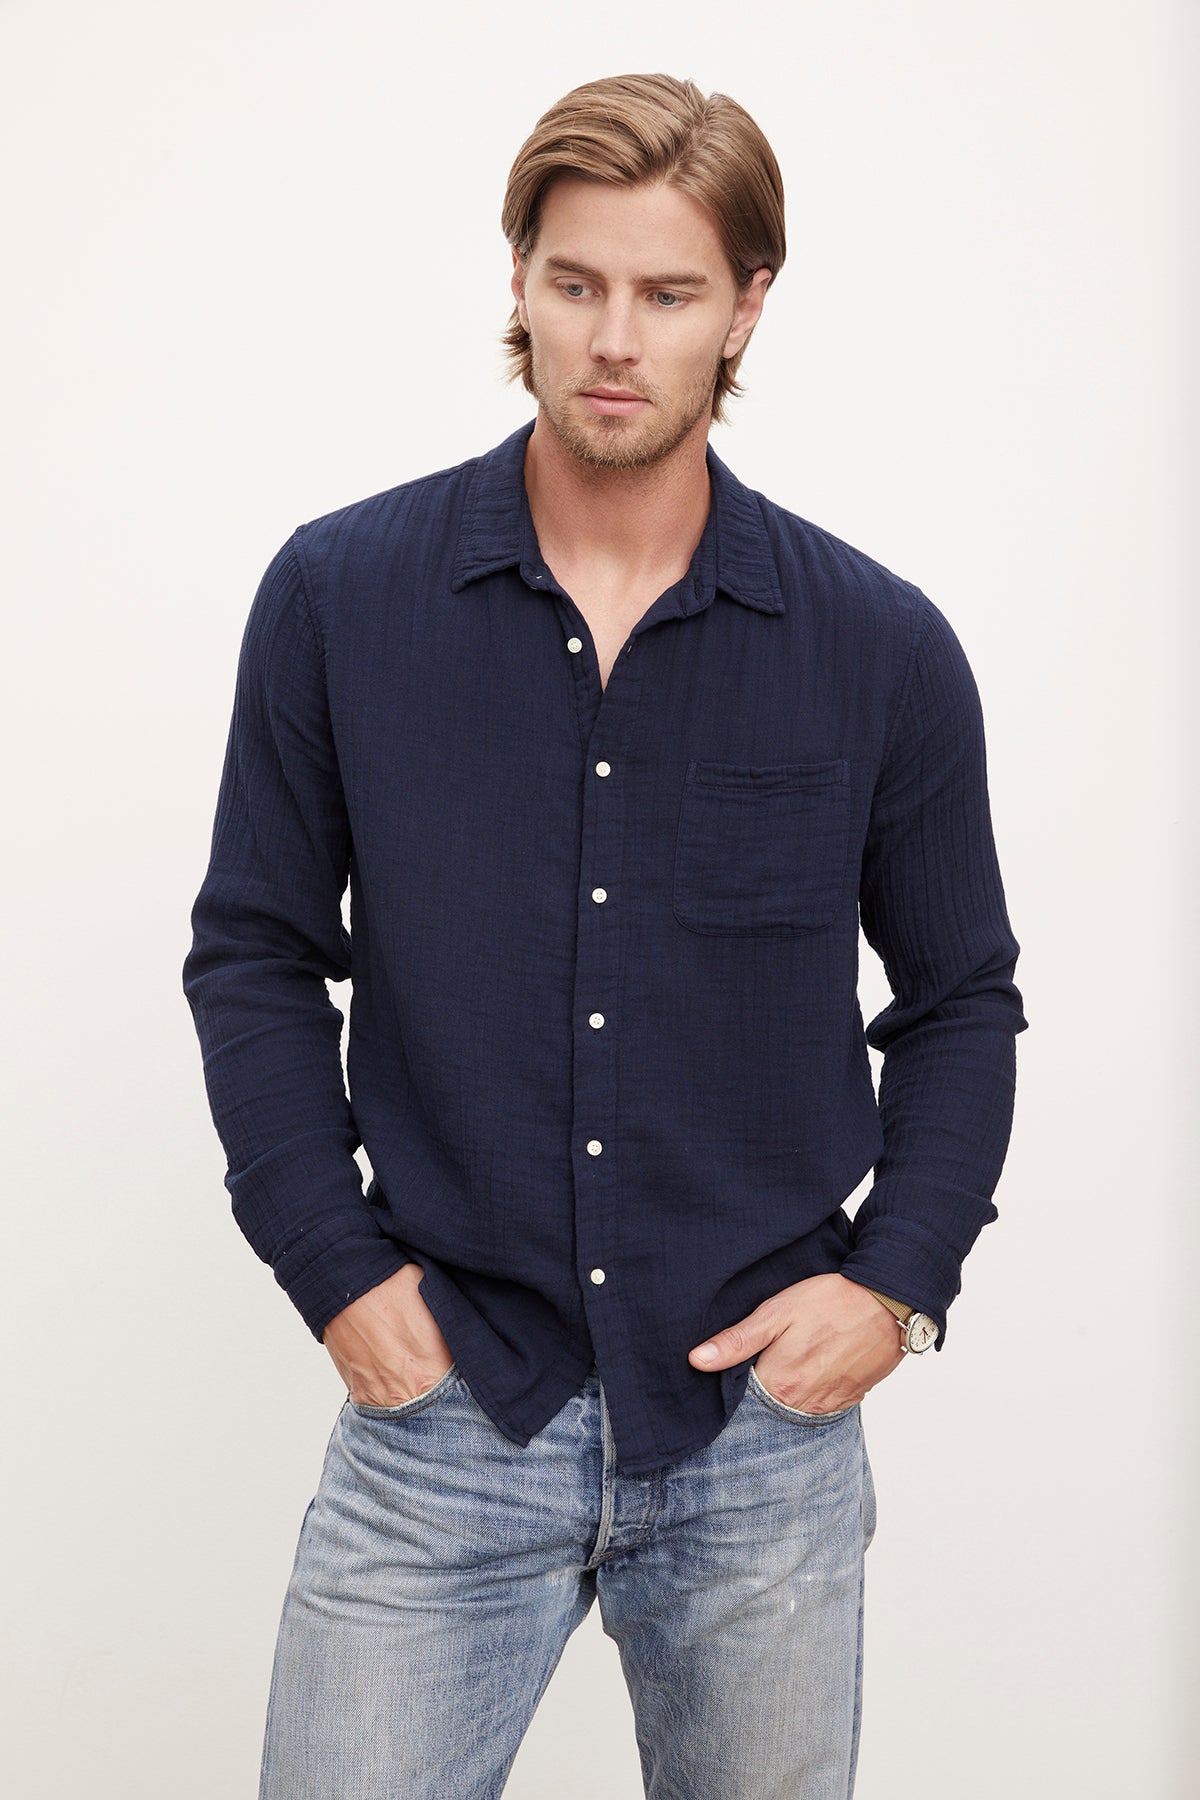 A man with medium-length hair wearing a dark blue Velvet by Graham & Spencer ELTON COTTON GAUZE woven button-up shirt and distressed jeans, standing against a plain background.-36009394897089